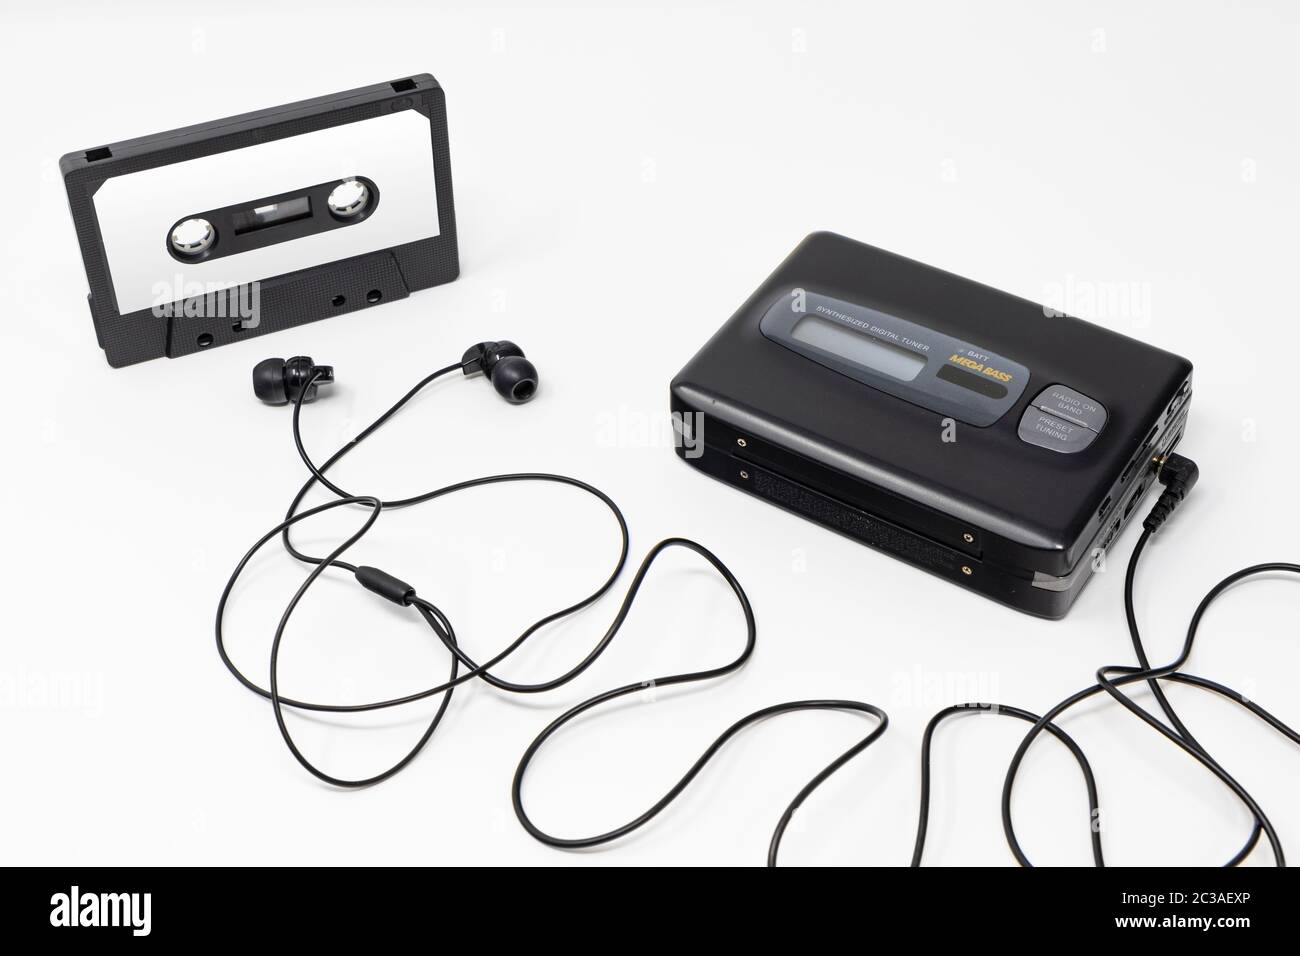 Vintage audio player. Old fashioned portable cassette player, cult object, icon and symbol of the 80s and 90s. Blank audio tape and headphones isolate Stock Photo